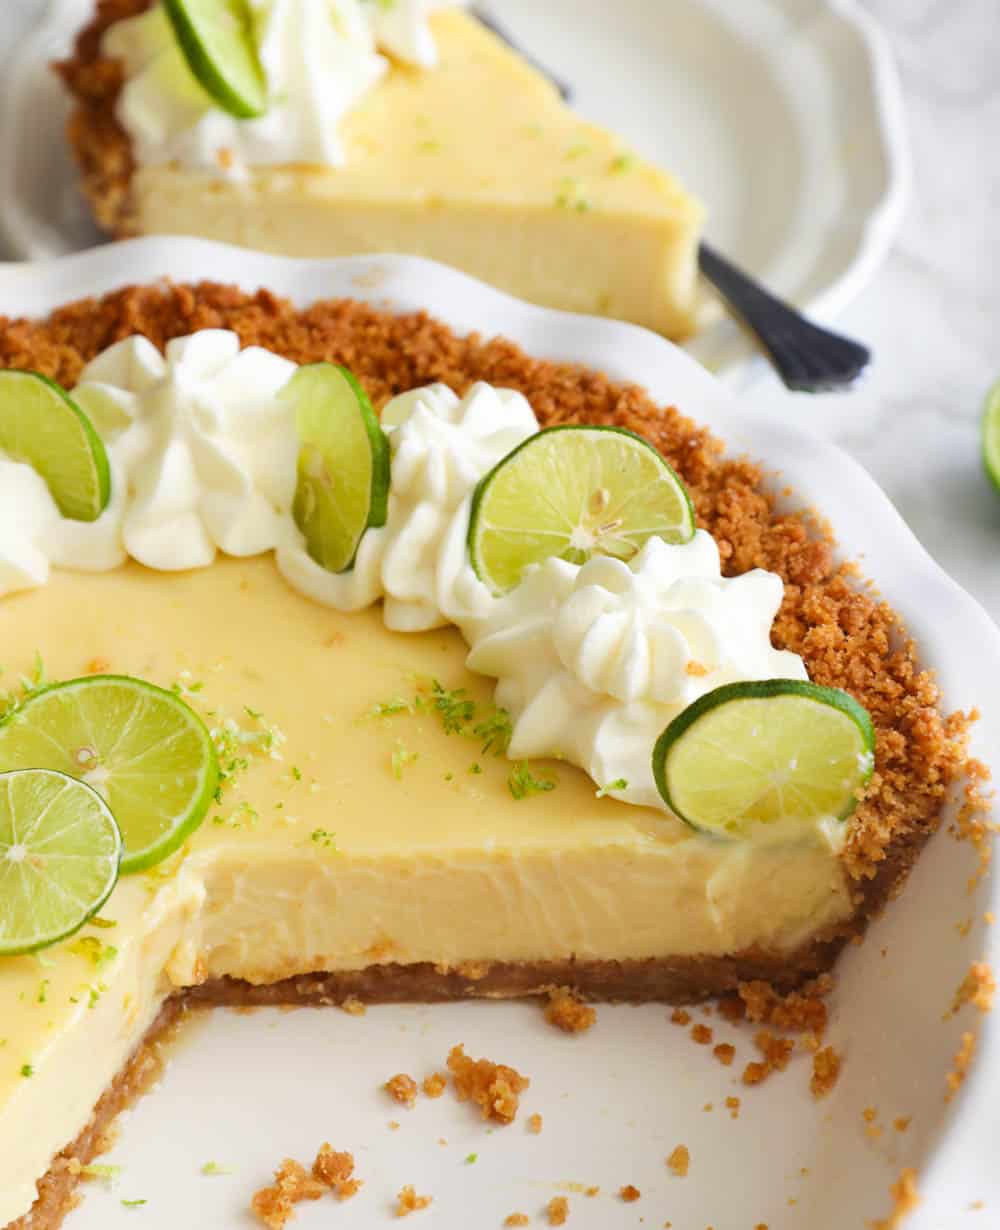 Sliced Key Lime Pie with a slice on a white plate in the background